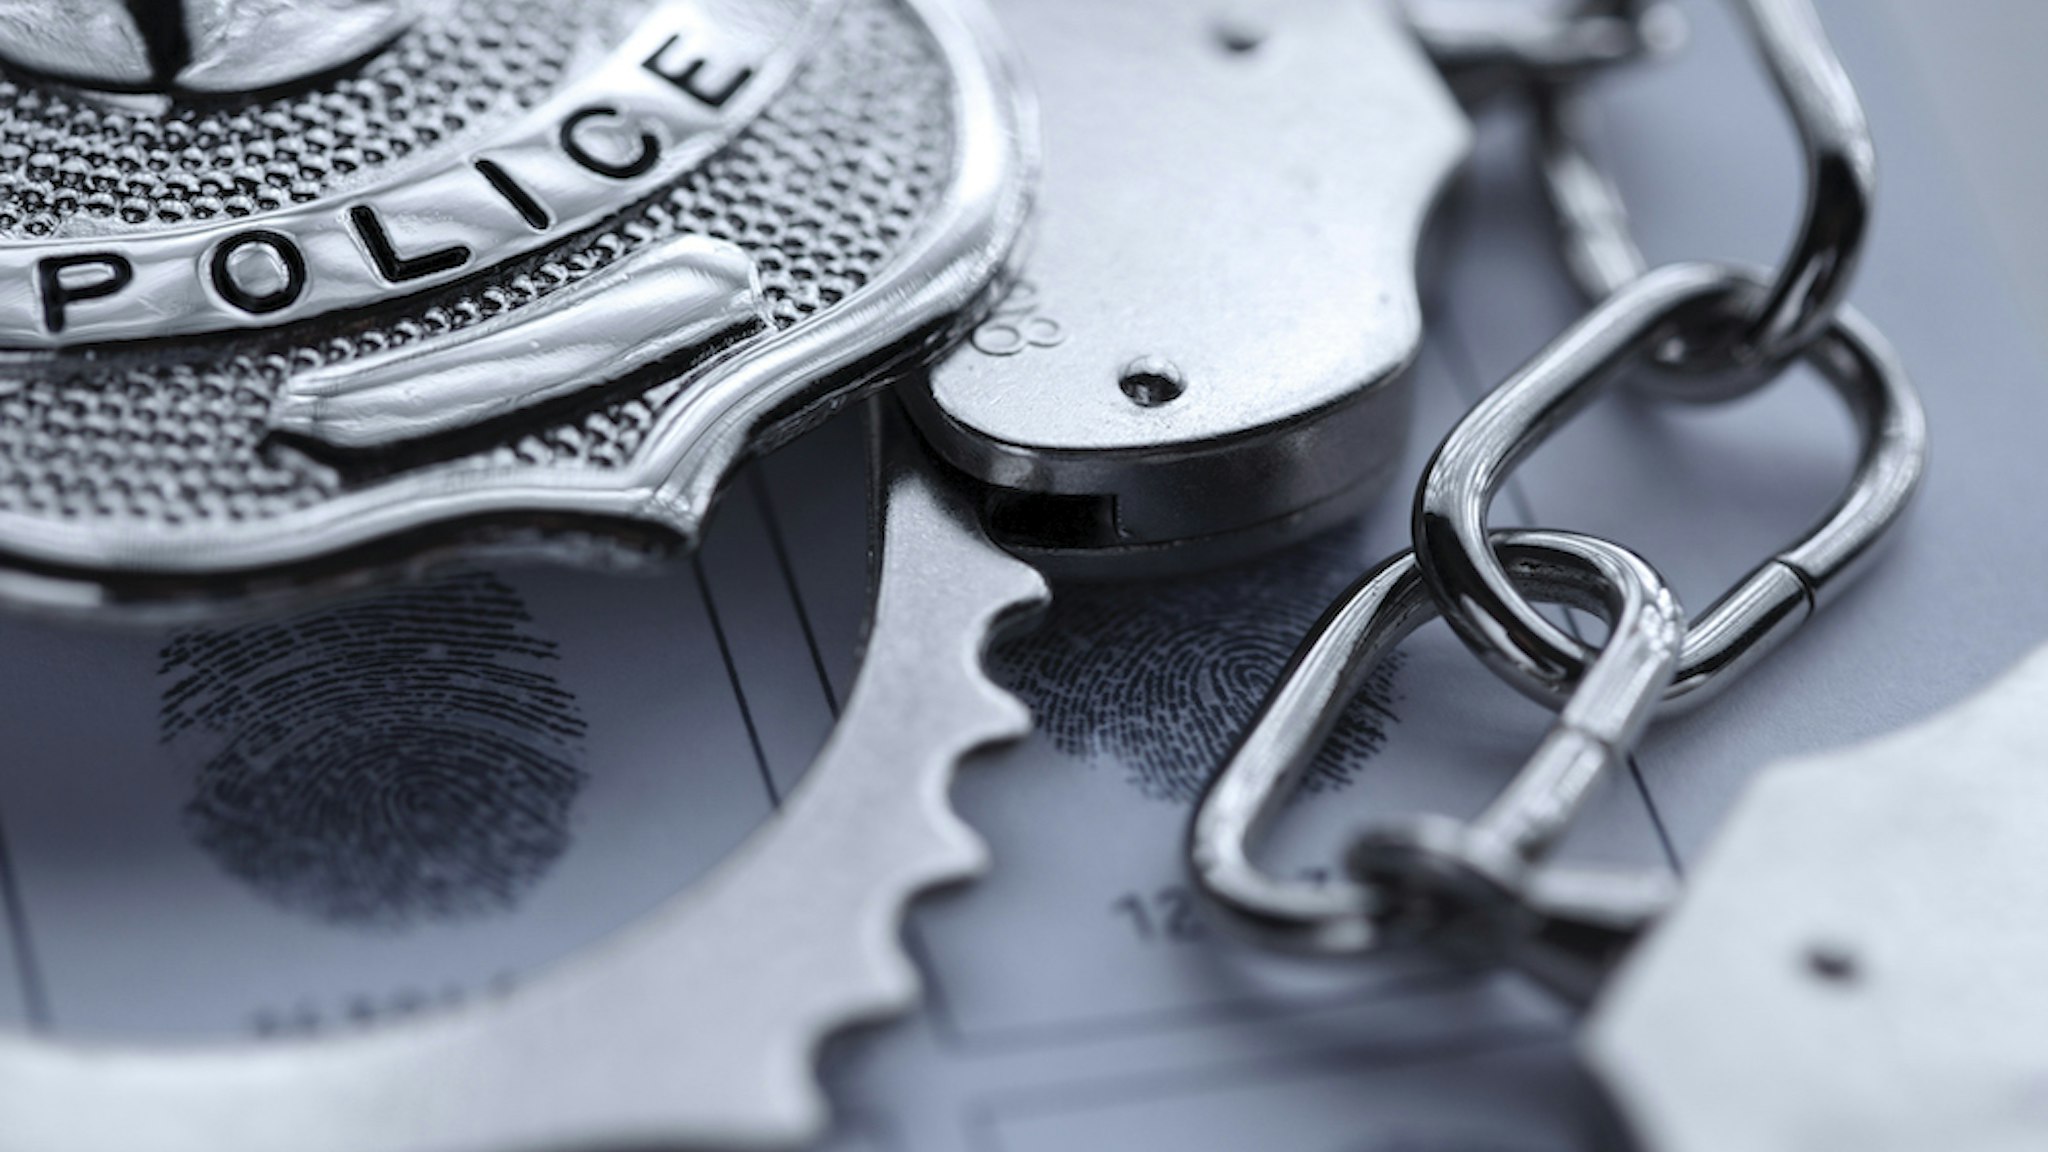 Police badge (amphotora/Getty Images)